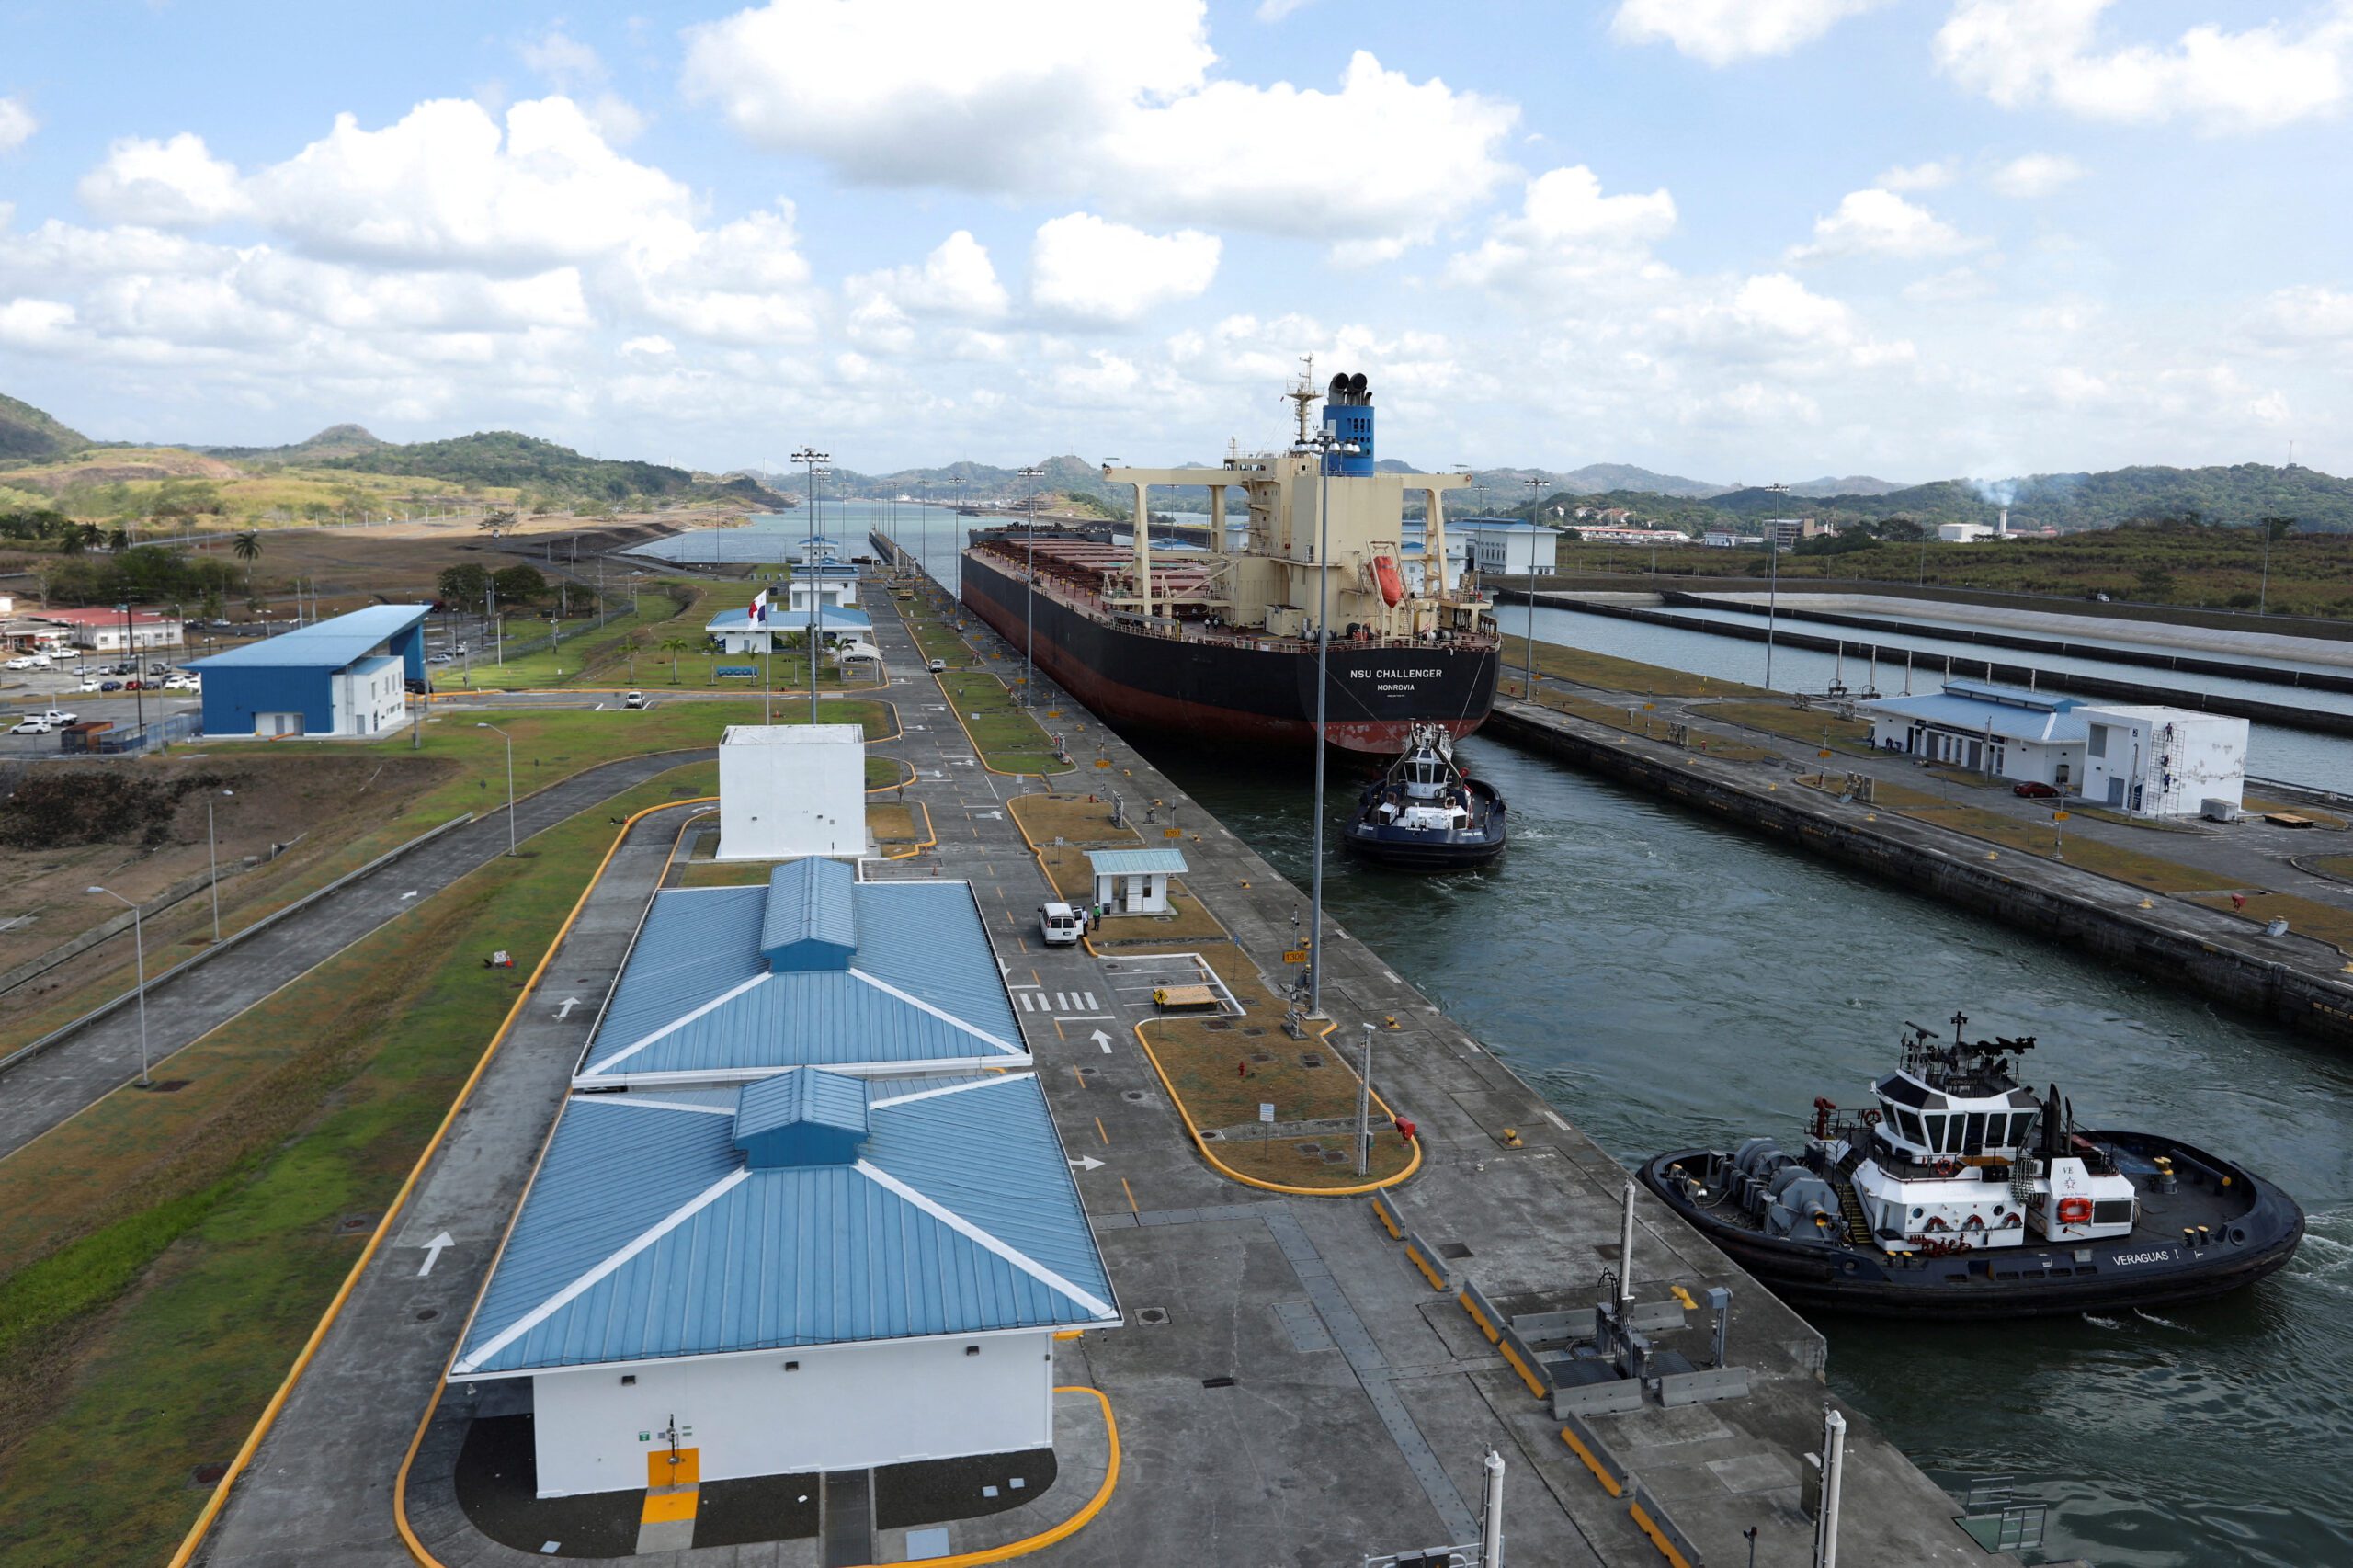 Monrovia NSU CHALLENGER bulk carrier transits the expanded canal through Cocoli Locks at the Panama Canal, on the outskirts of Panama City, Panama April 19, 2023. REUTERS/Aris Martinez/File Photo